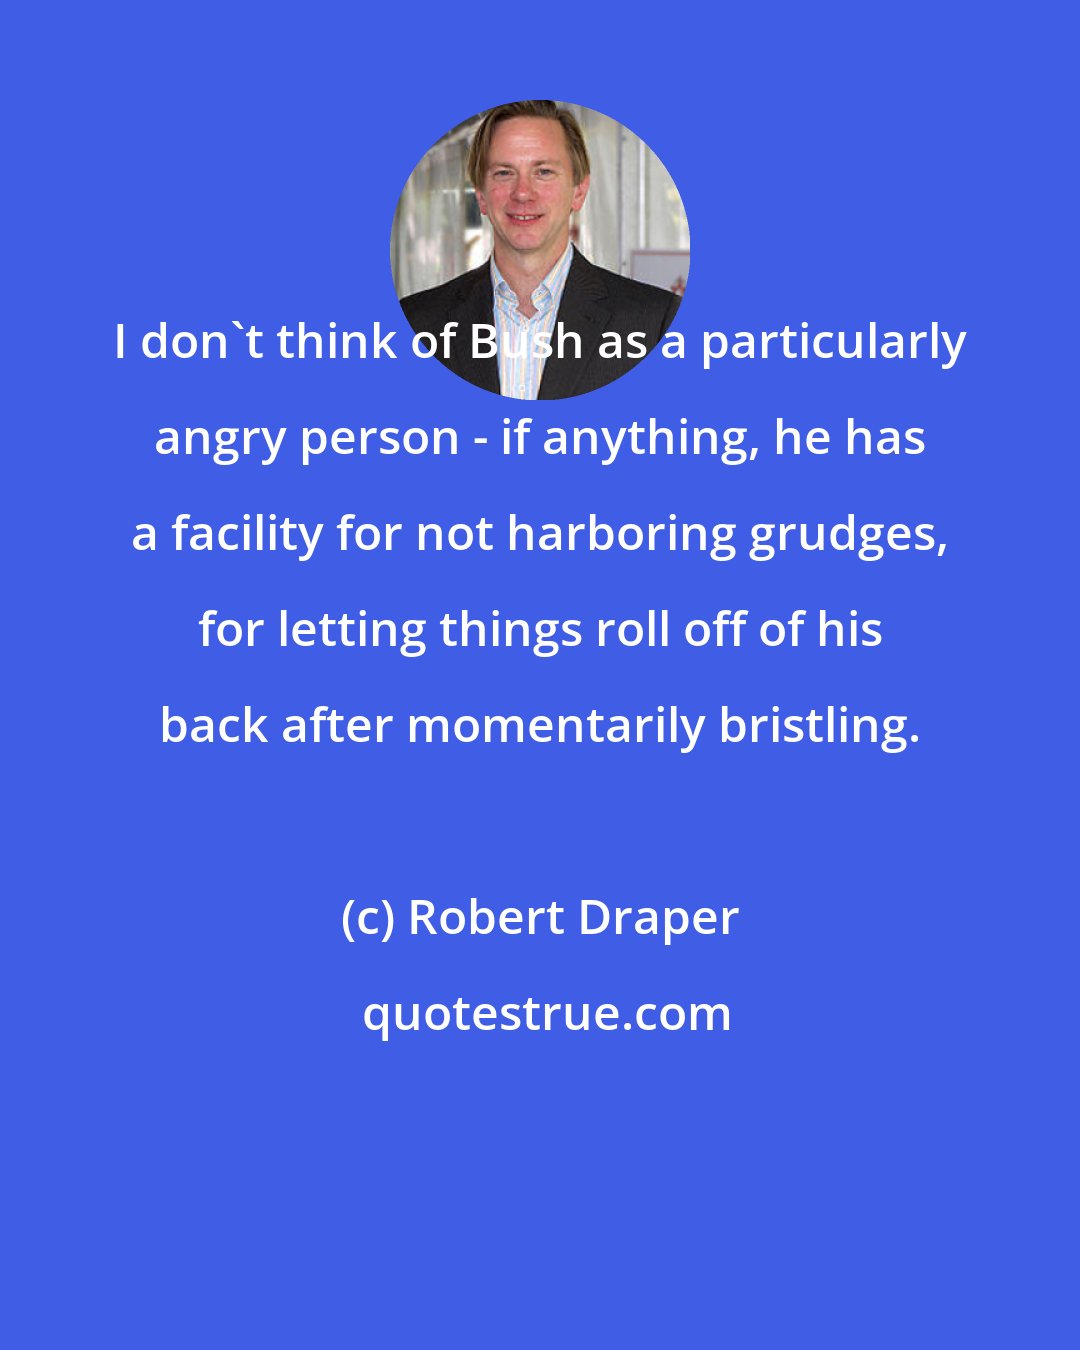 Robert Draper: I don't think of Bush as a particularly angry person - if anything, he has a facility for not harboring grudges, for letting things roll off of his back after momentarily bristling.